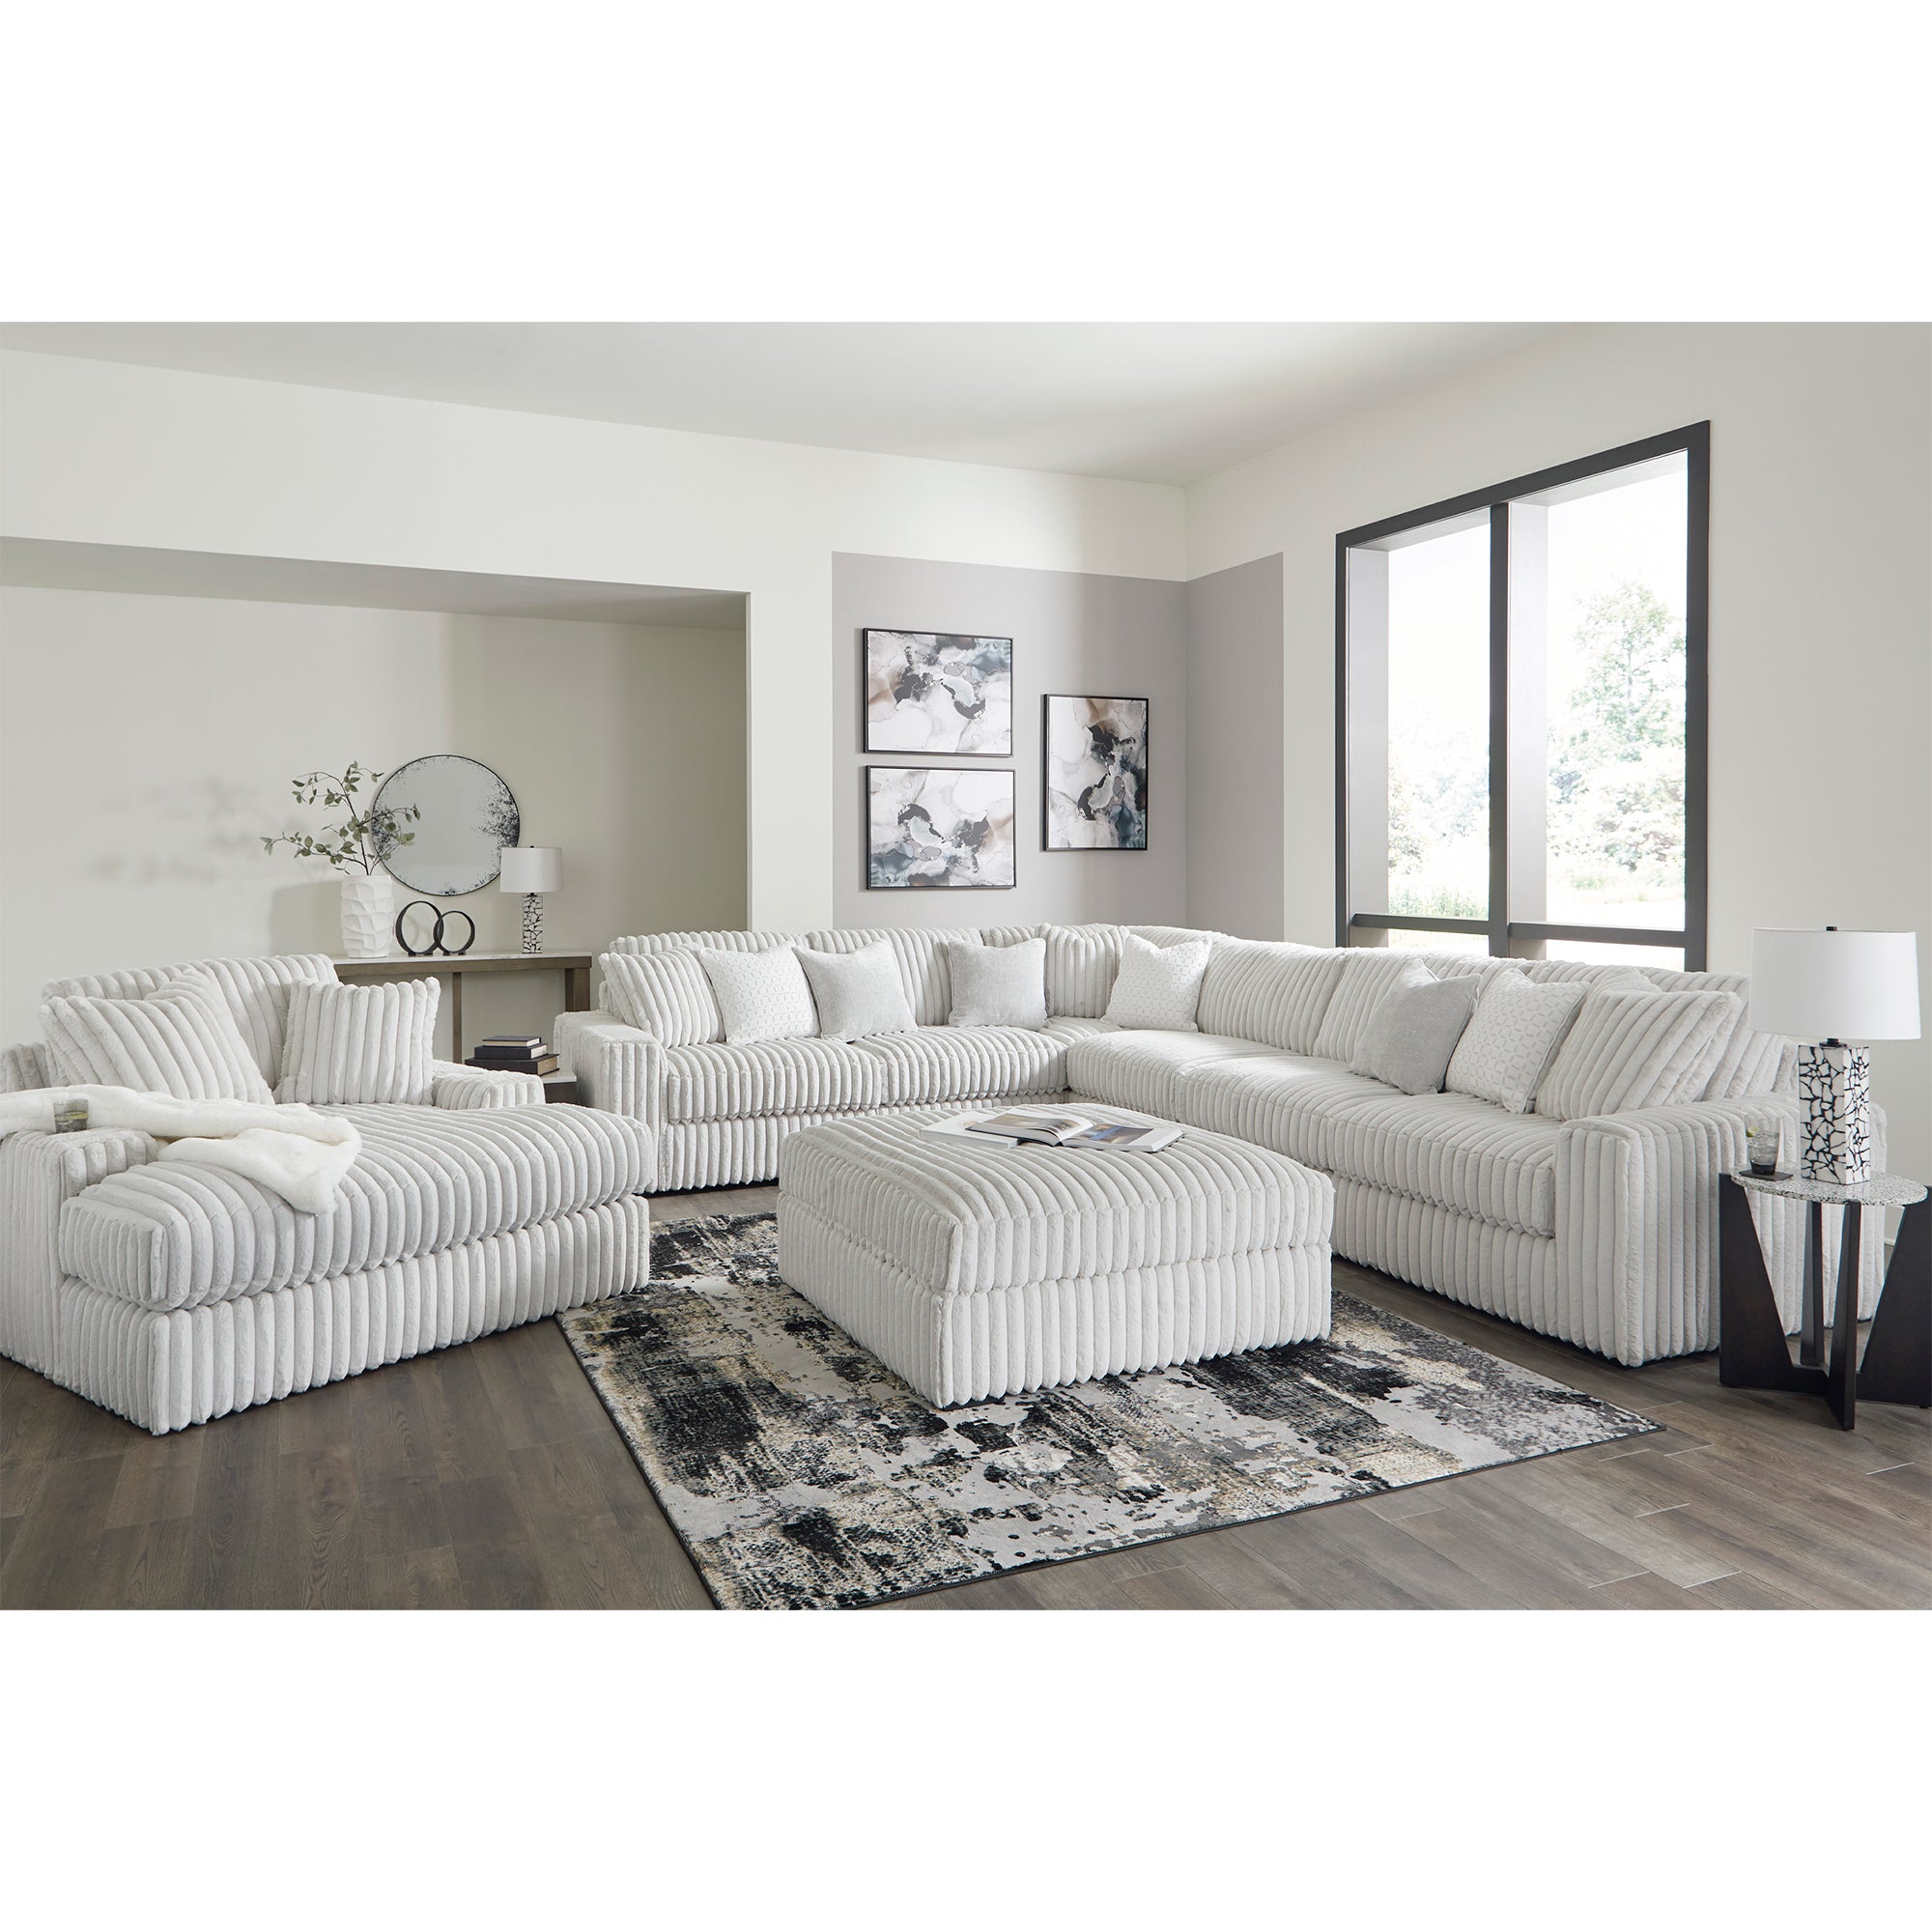 Stupendous Sectional with armless chair and sofas, designed for flexible layout options and superior comfort